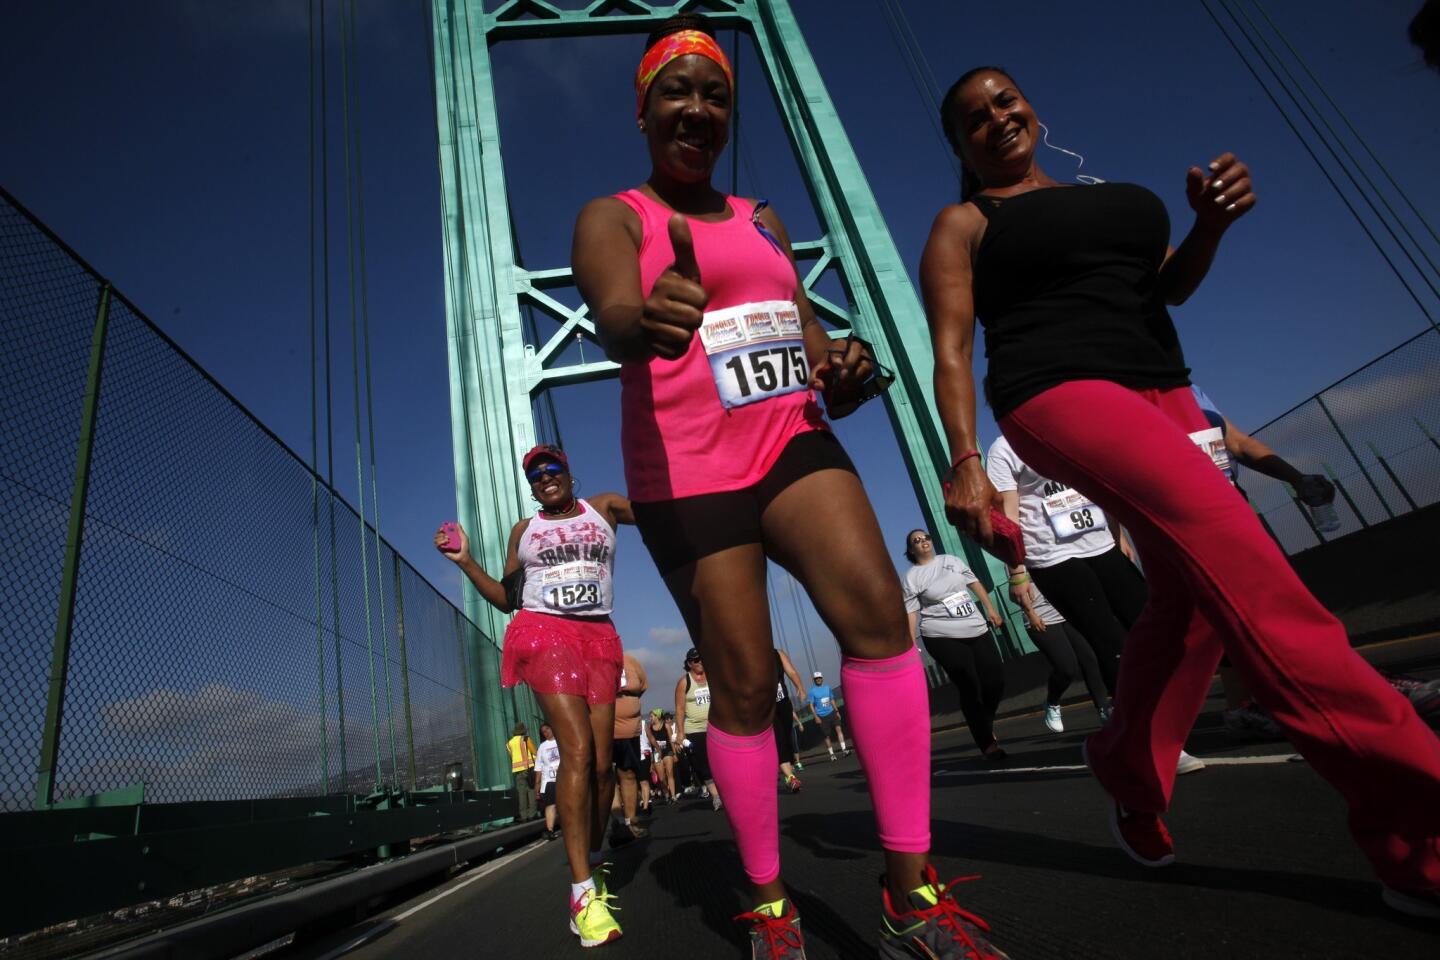 Melanie Bunley, left, celebrated her 50th birthday by joining Cherlyn Clark, center, and Yvonne Ali as they and about 3,000 others crossed the Vincent Thomas Bridge twice during the annual 5.3-mile "Conquer the Bridge" race. Proceeds benefit the LAPD Harbor Division Booster Club for Kids.